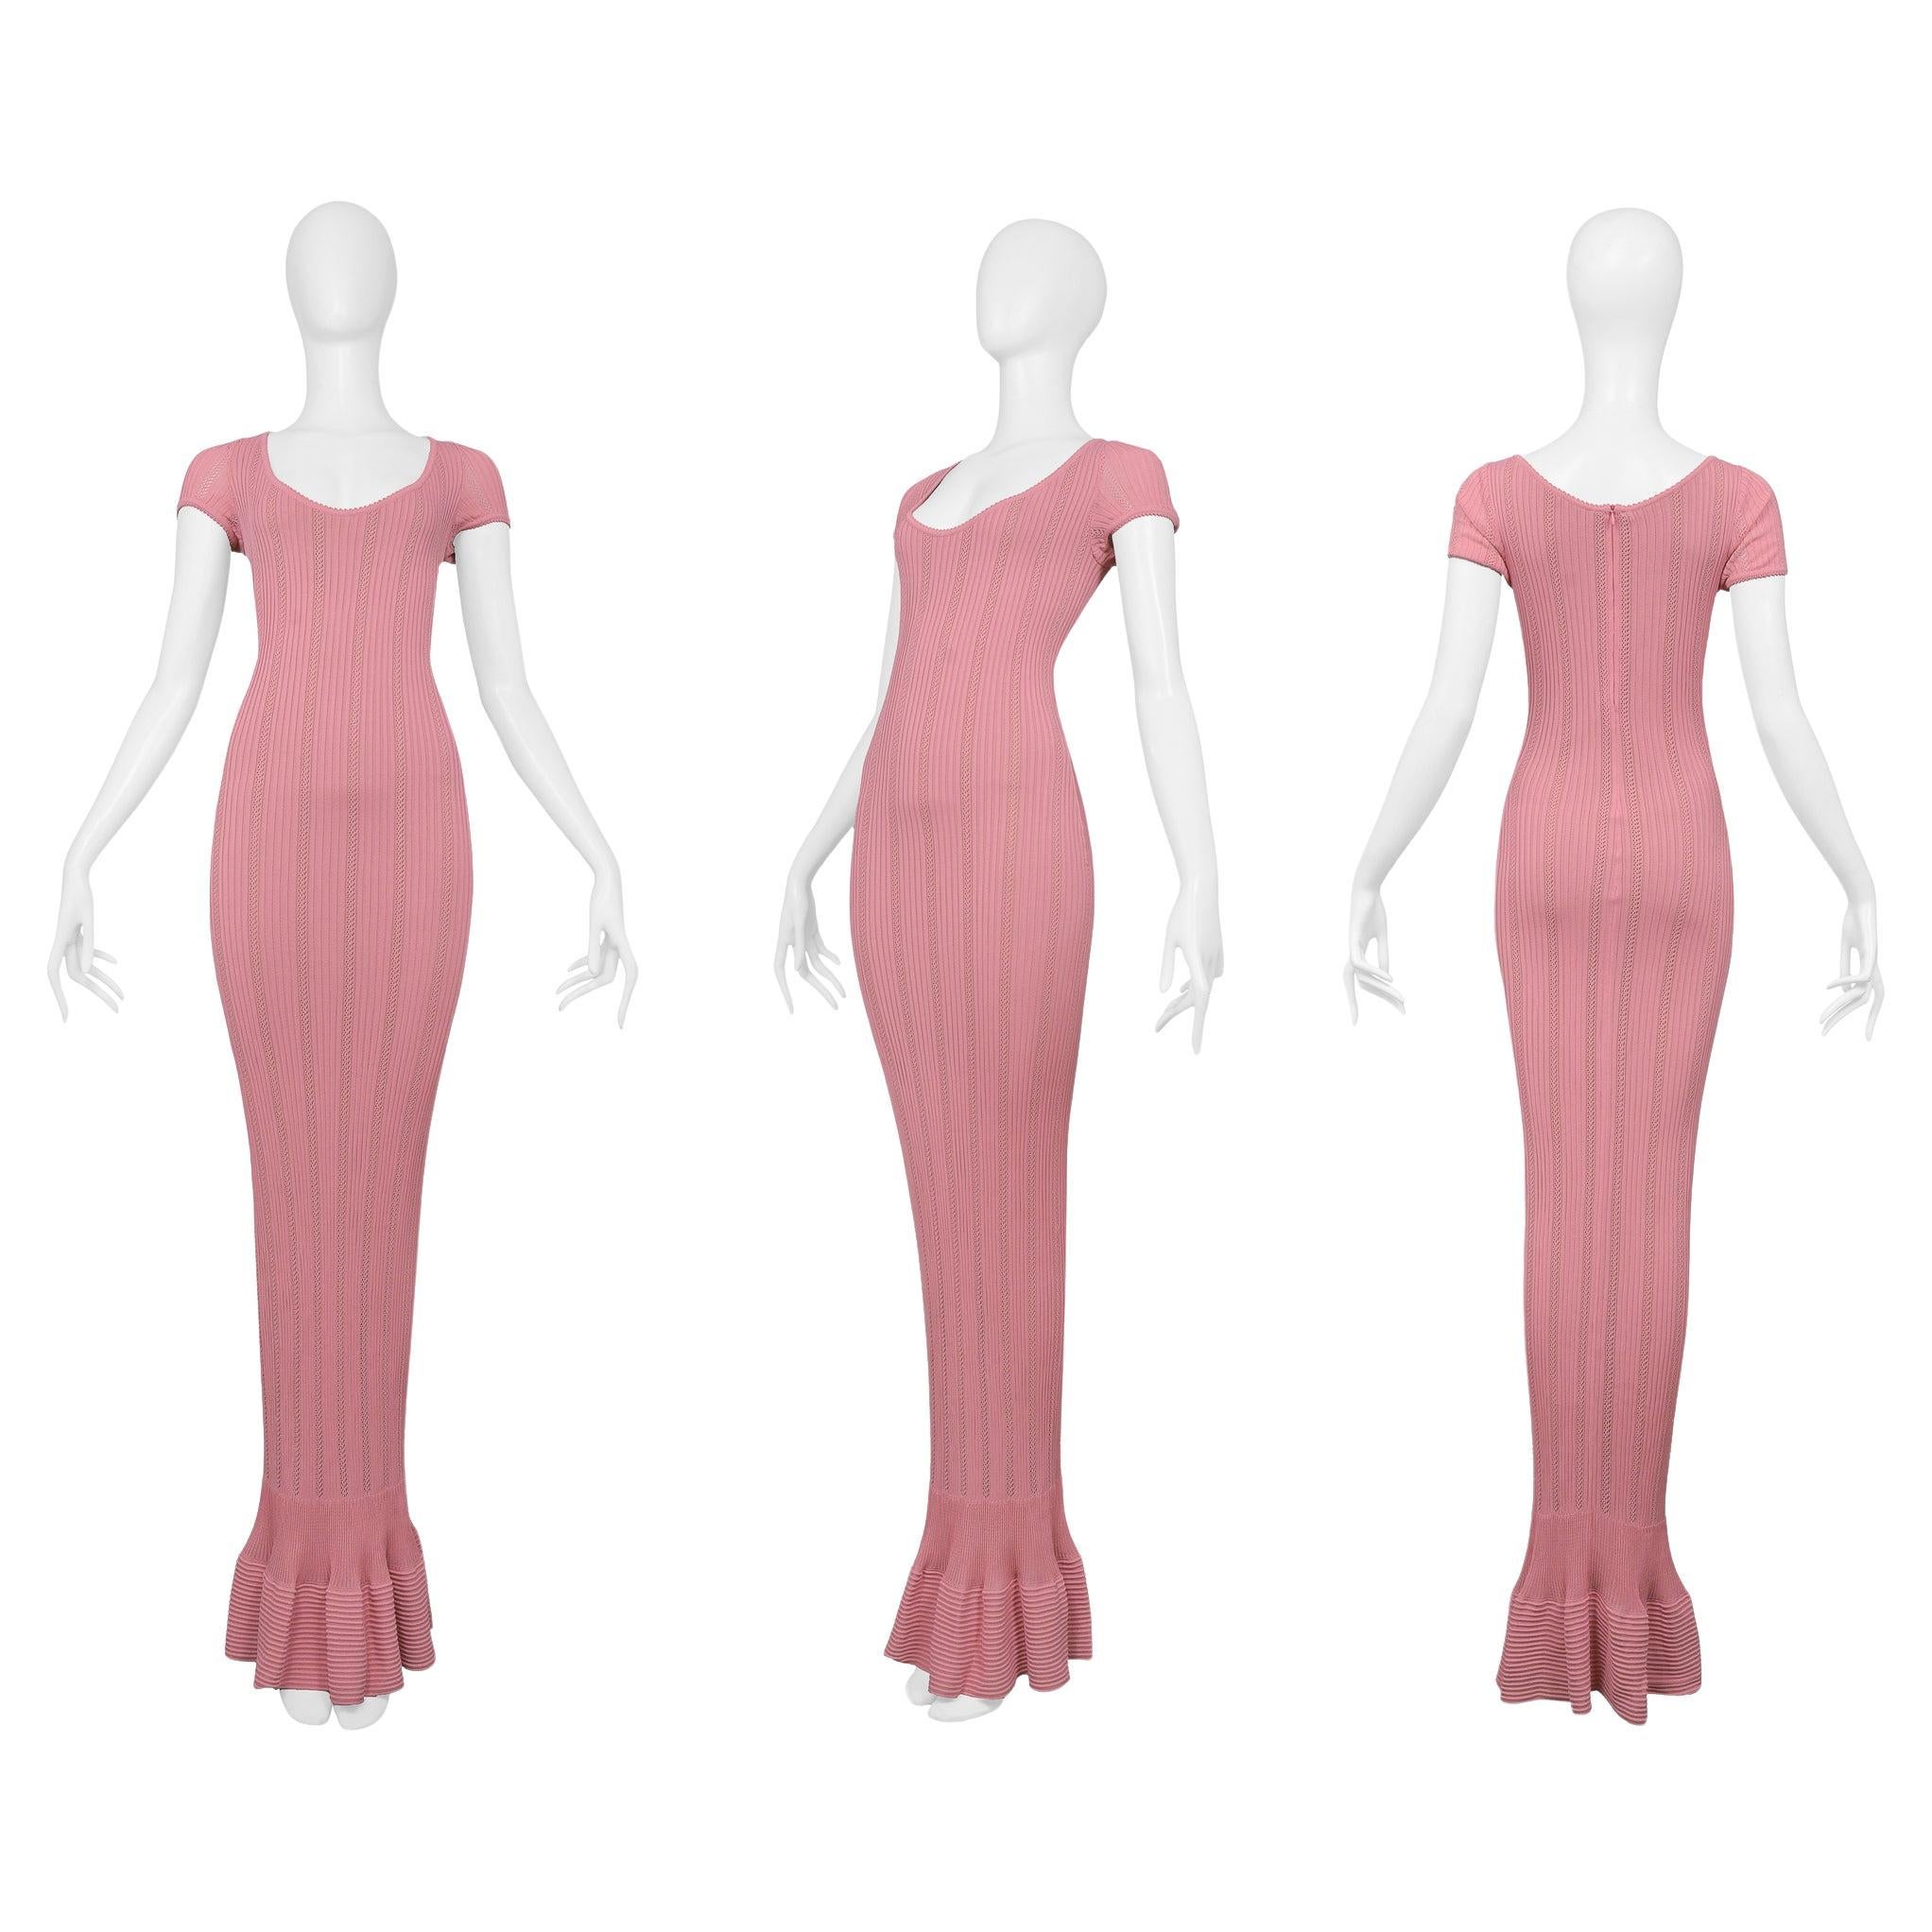 Alaia Pink Knit Bodycon Mermaid Dress SS 1996 For Sale